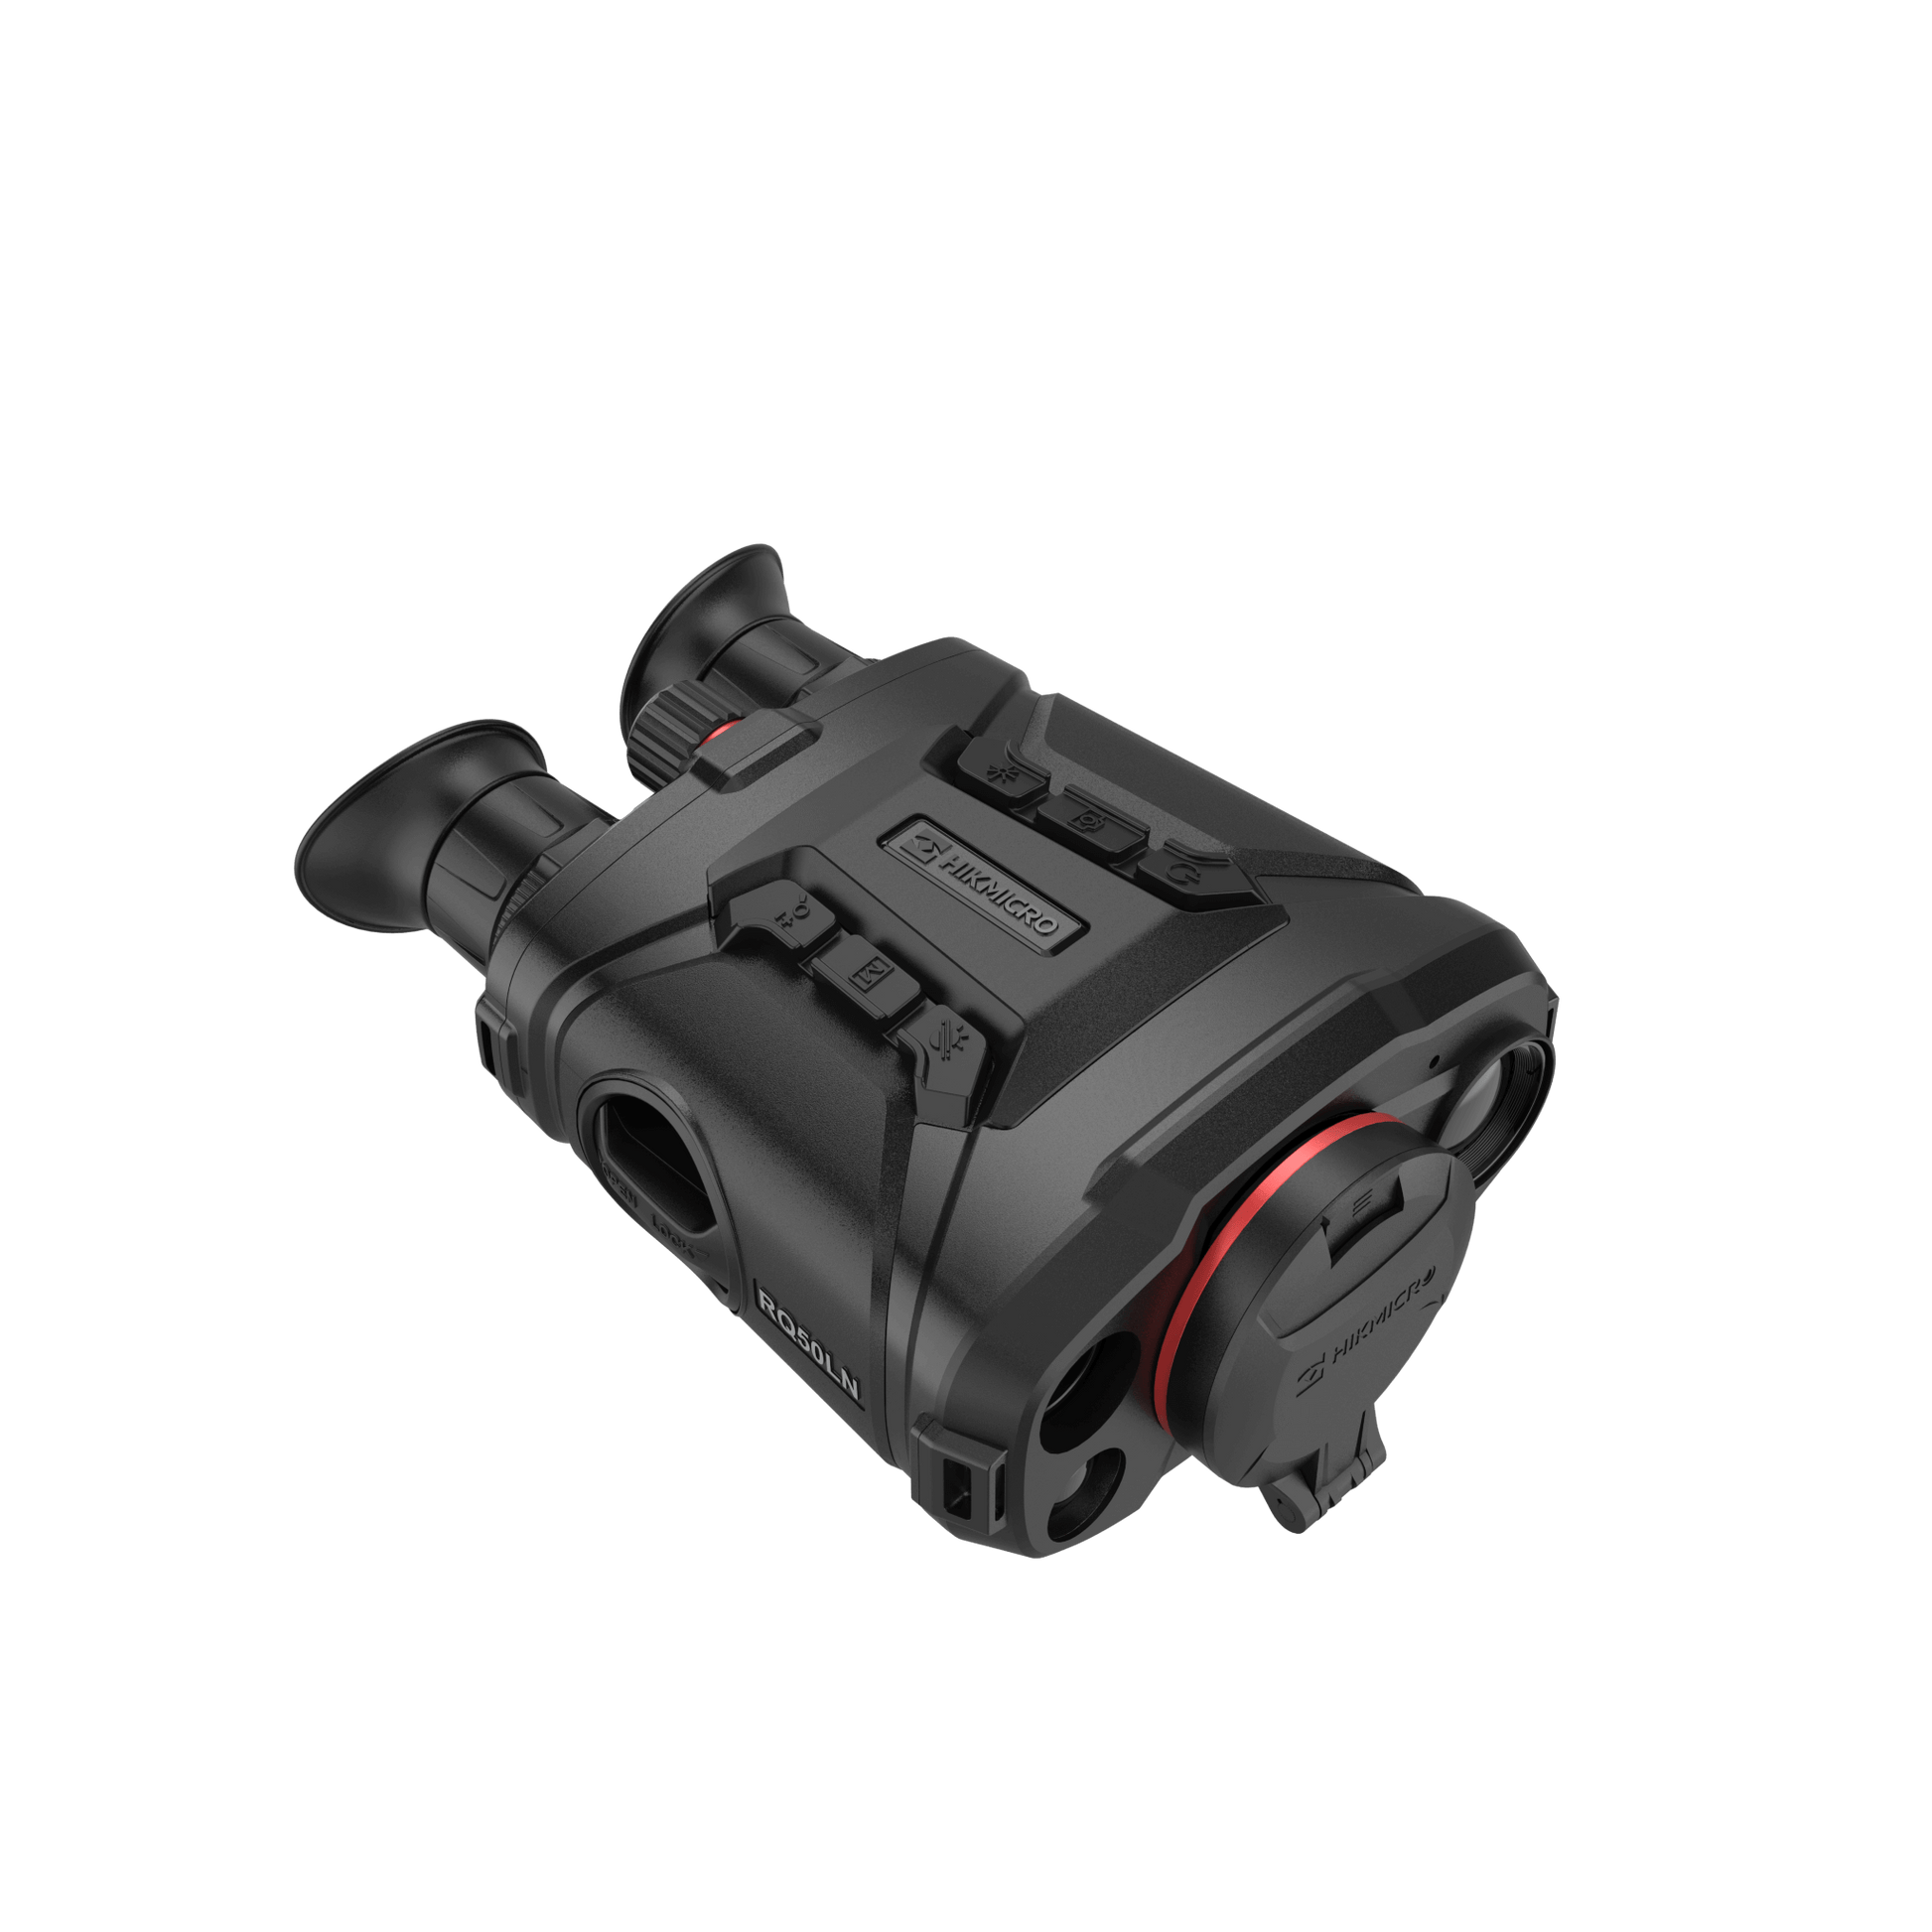 eld thermal binocular with infrared and optical capabilities - Front Right View